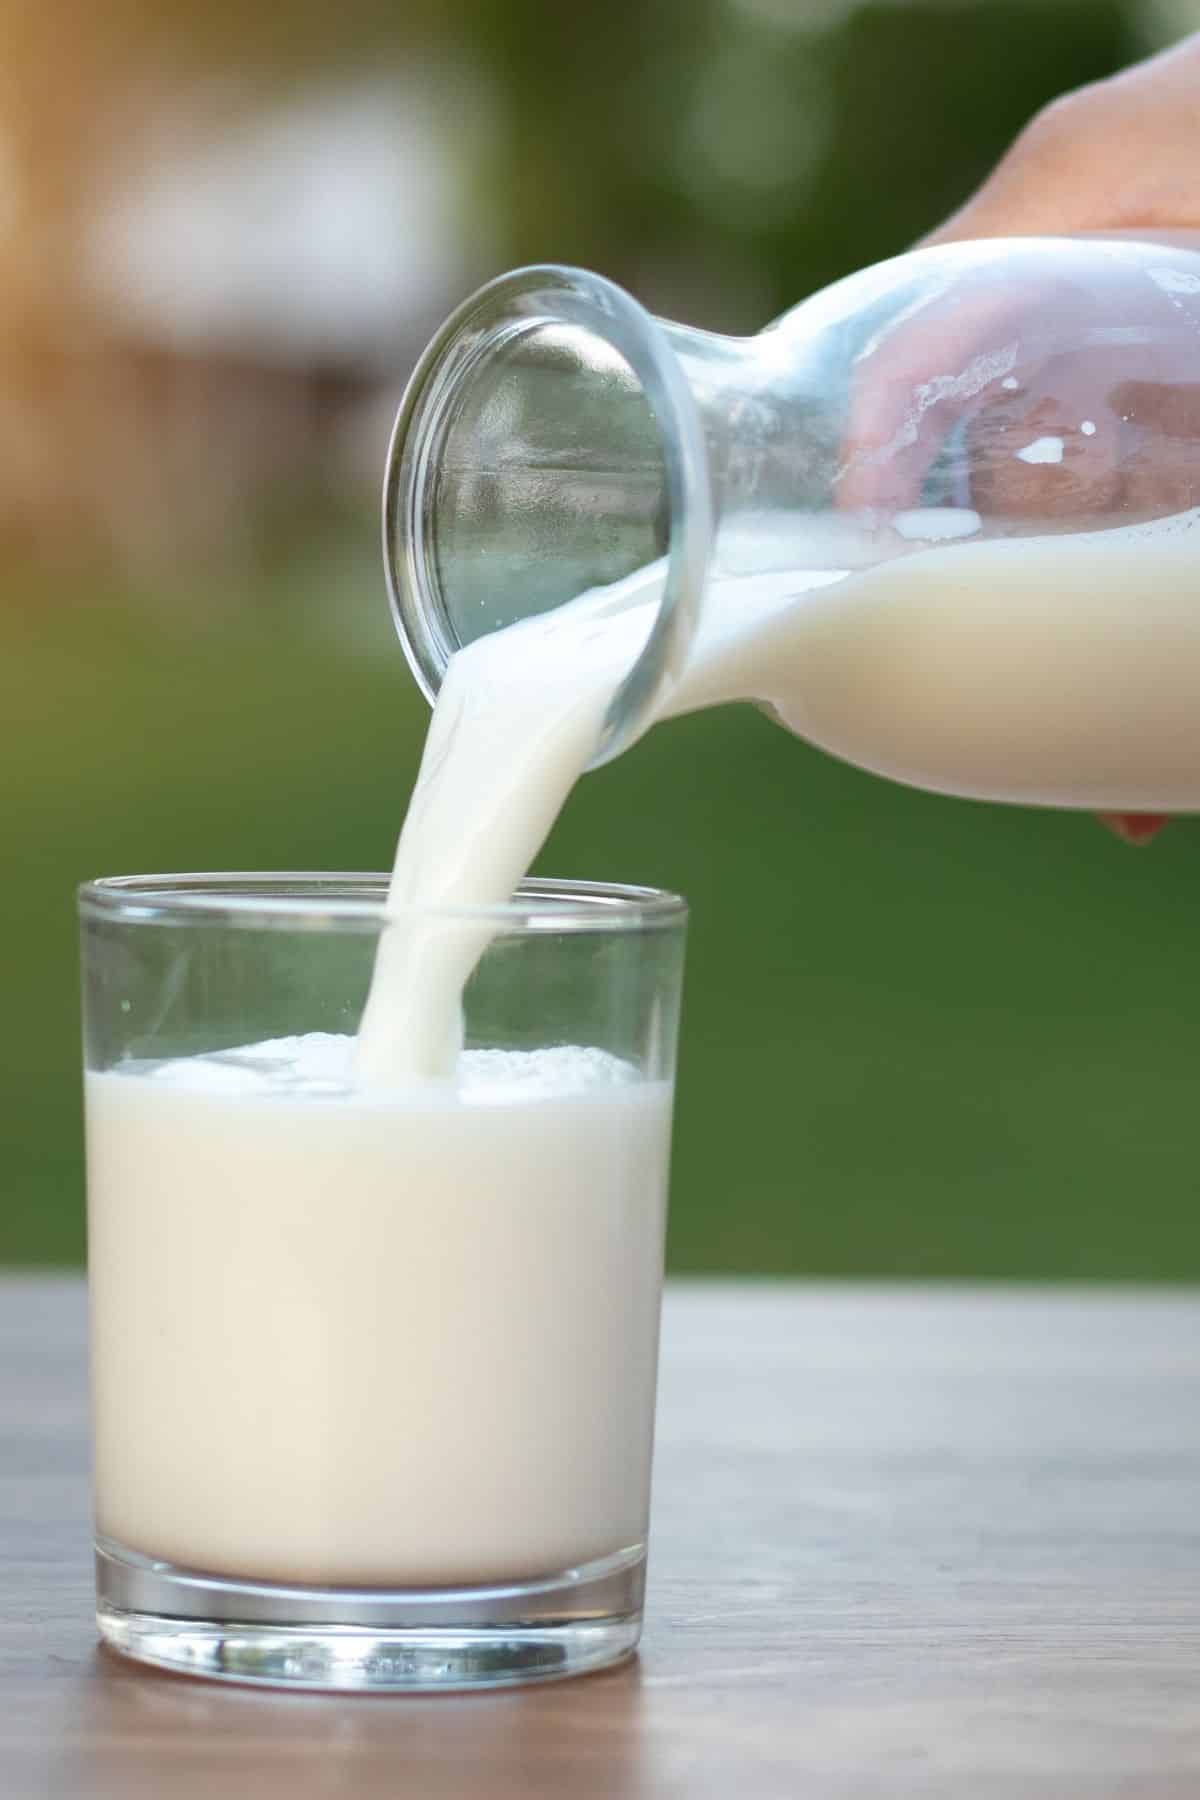 Raw milk being poured from a jar into a glass.